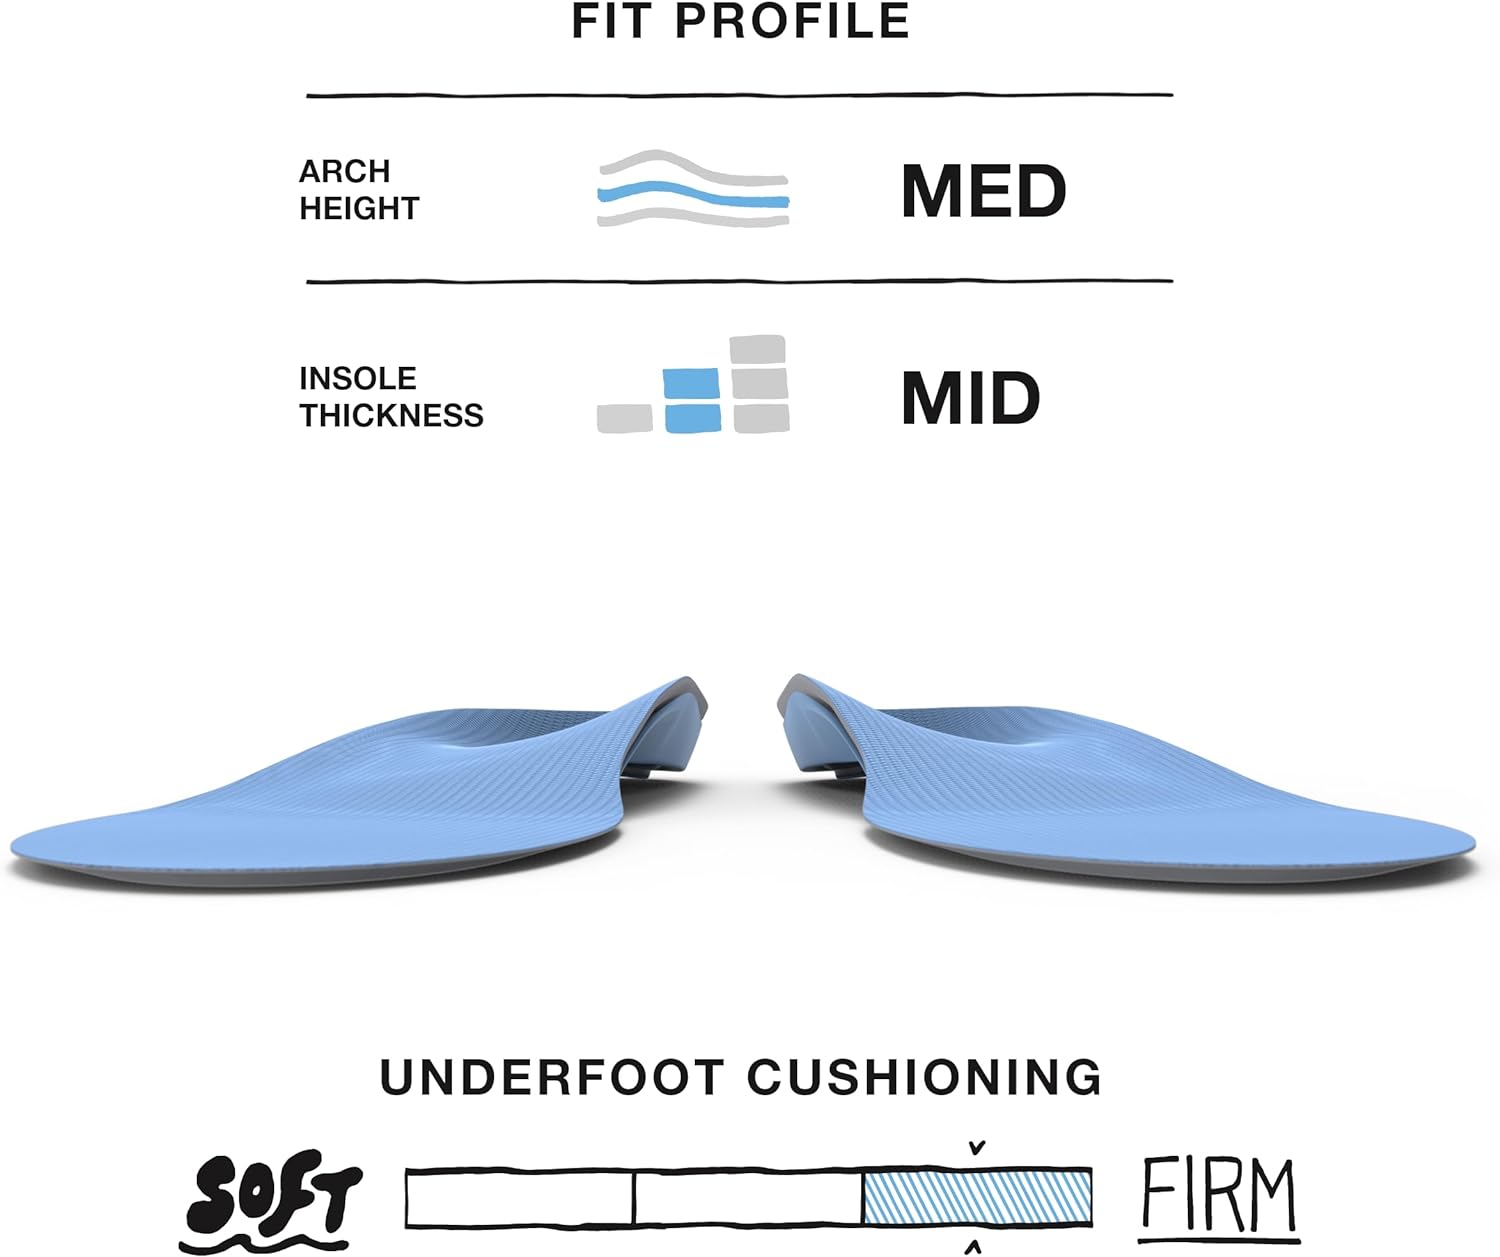 Superfeet All-Purpose Support Medium Arch Insoles (Blue) - Trim-To-Fit Orthotic Shoe Inserts - Professional Grade